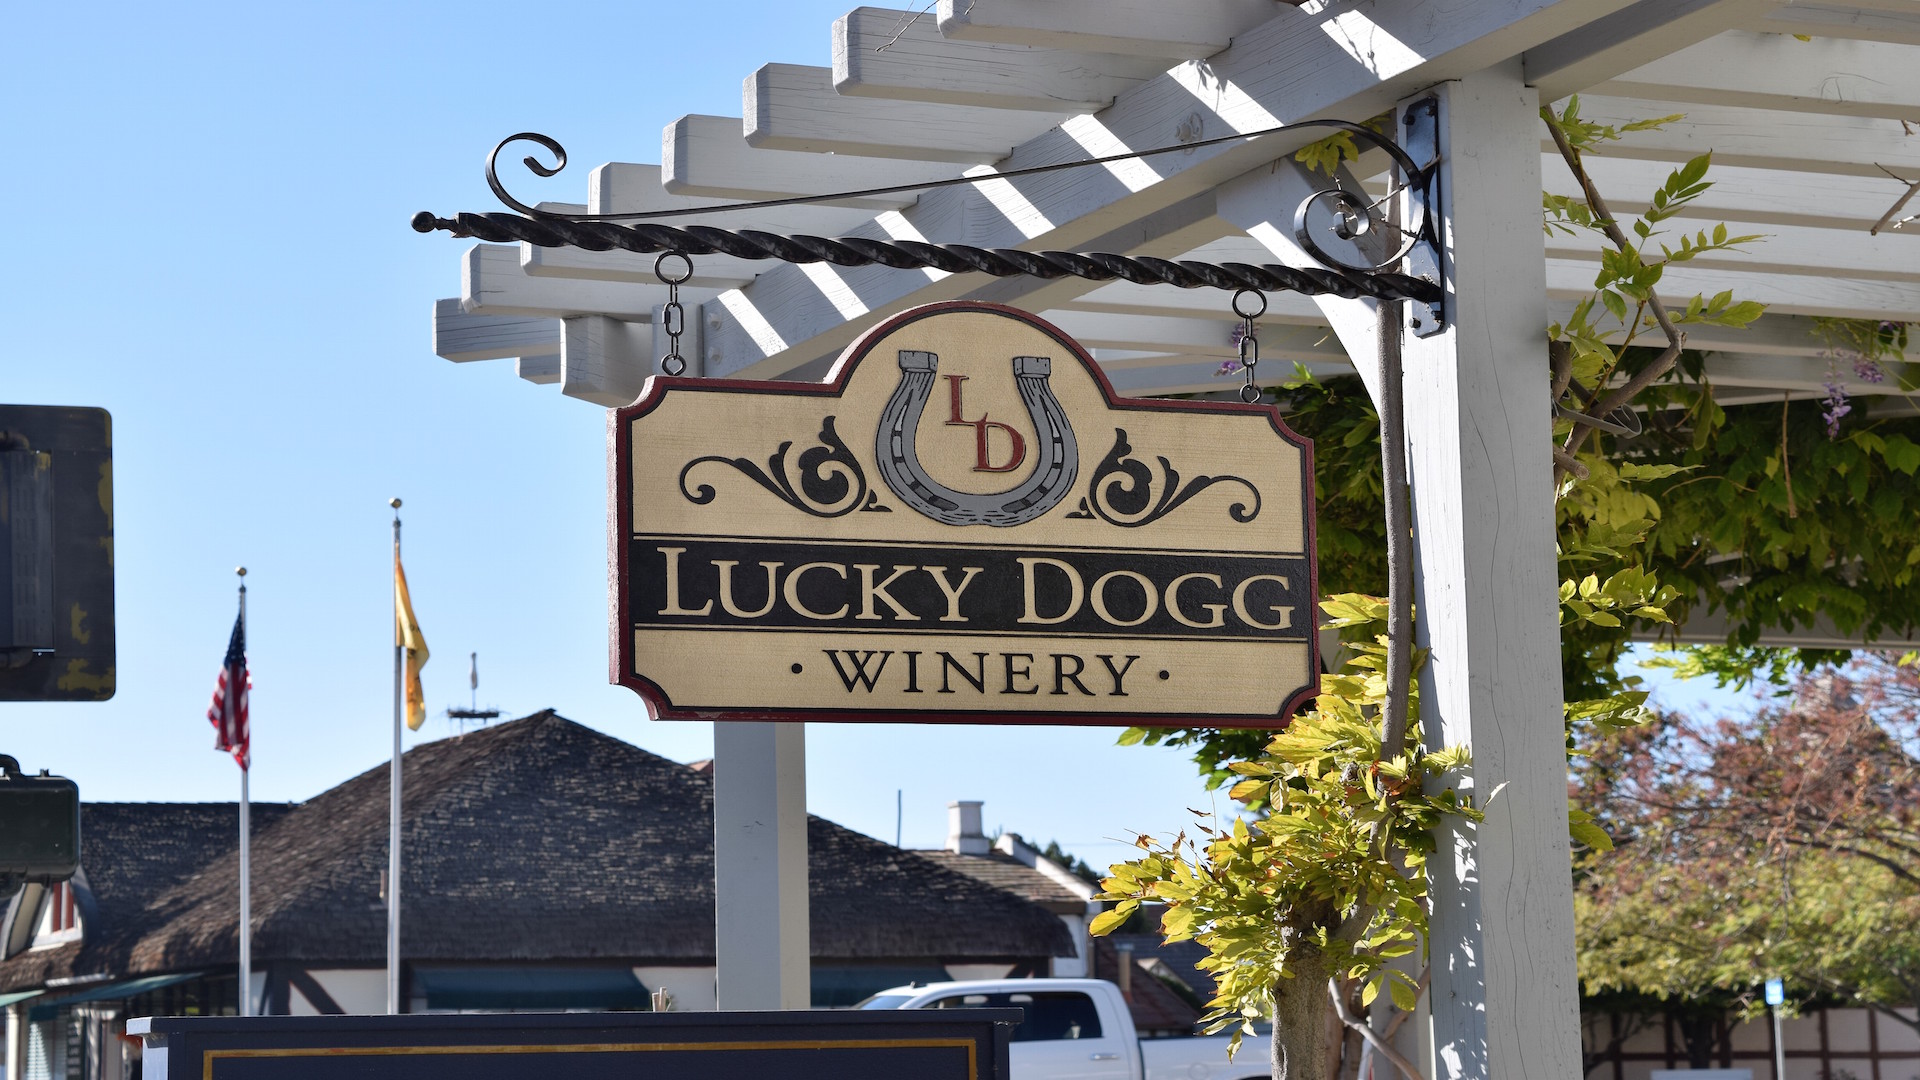 Lucky Dogg Winery